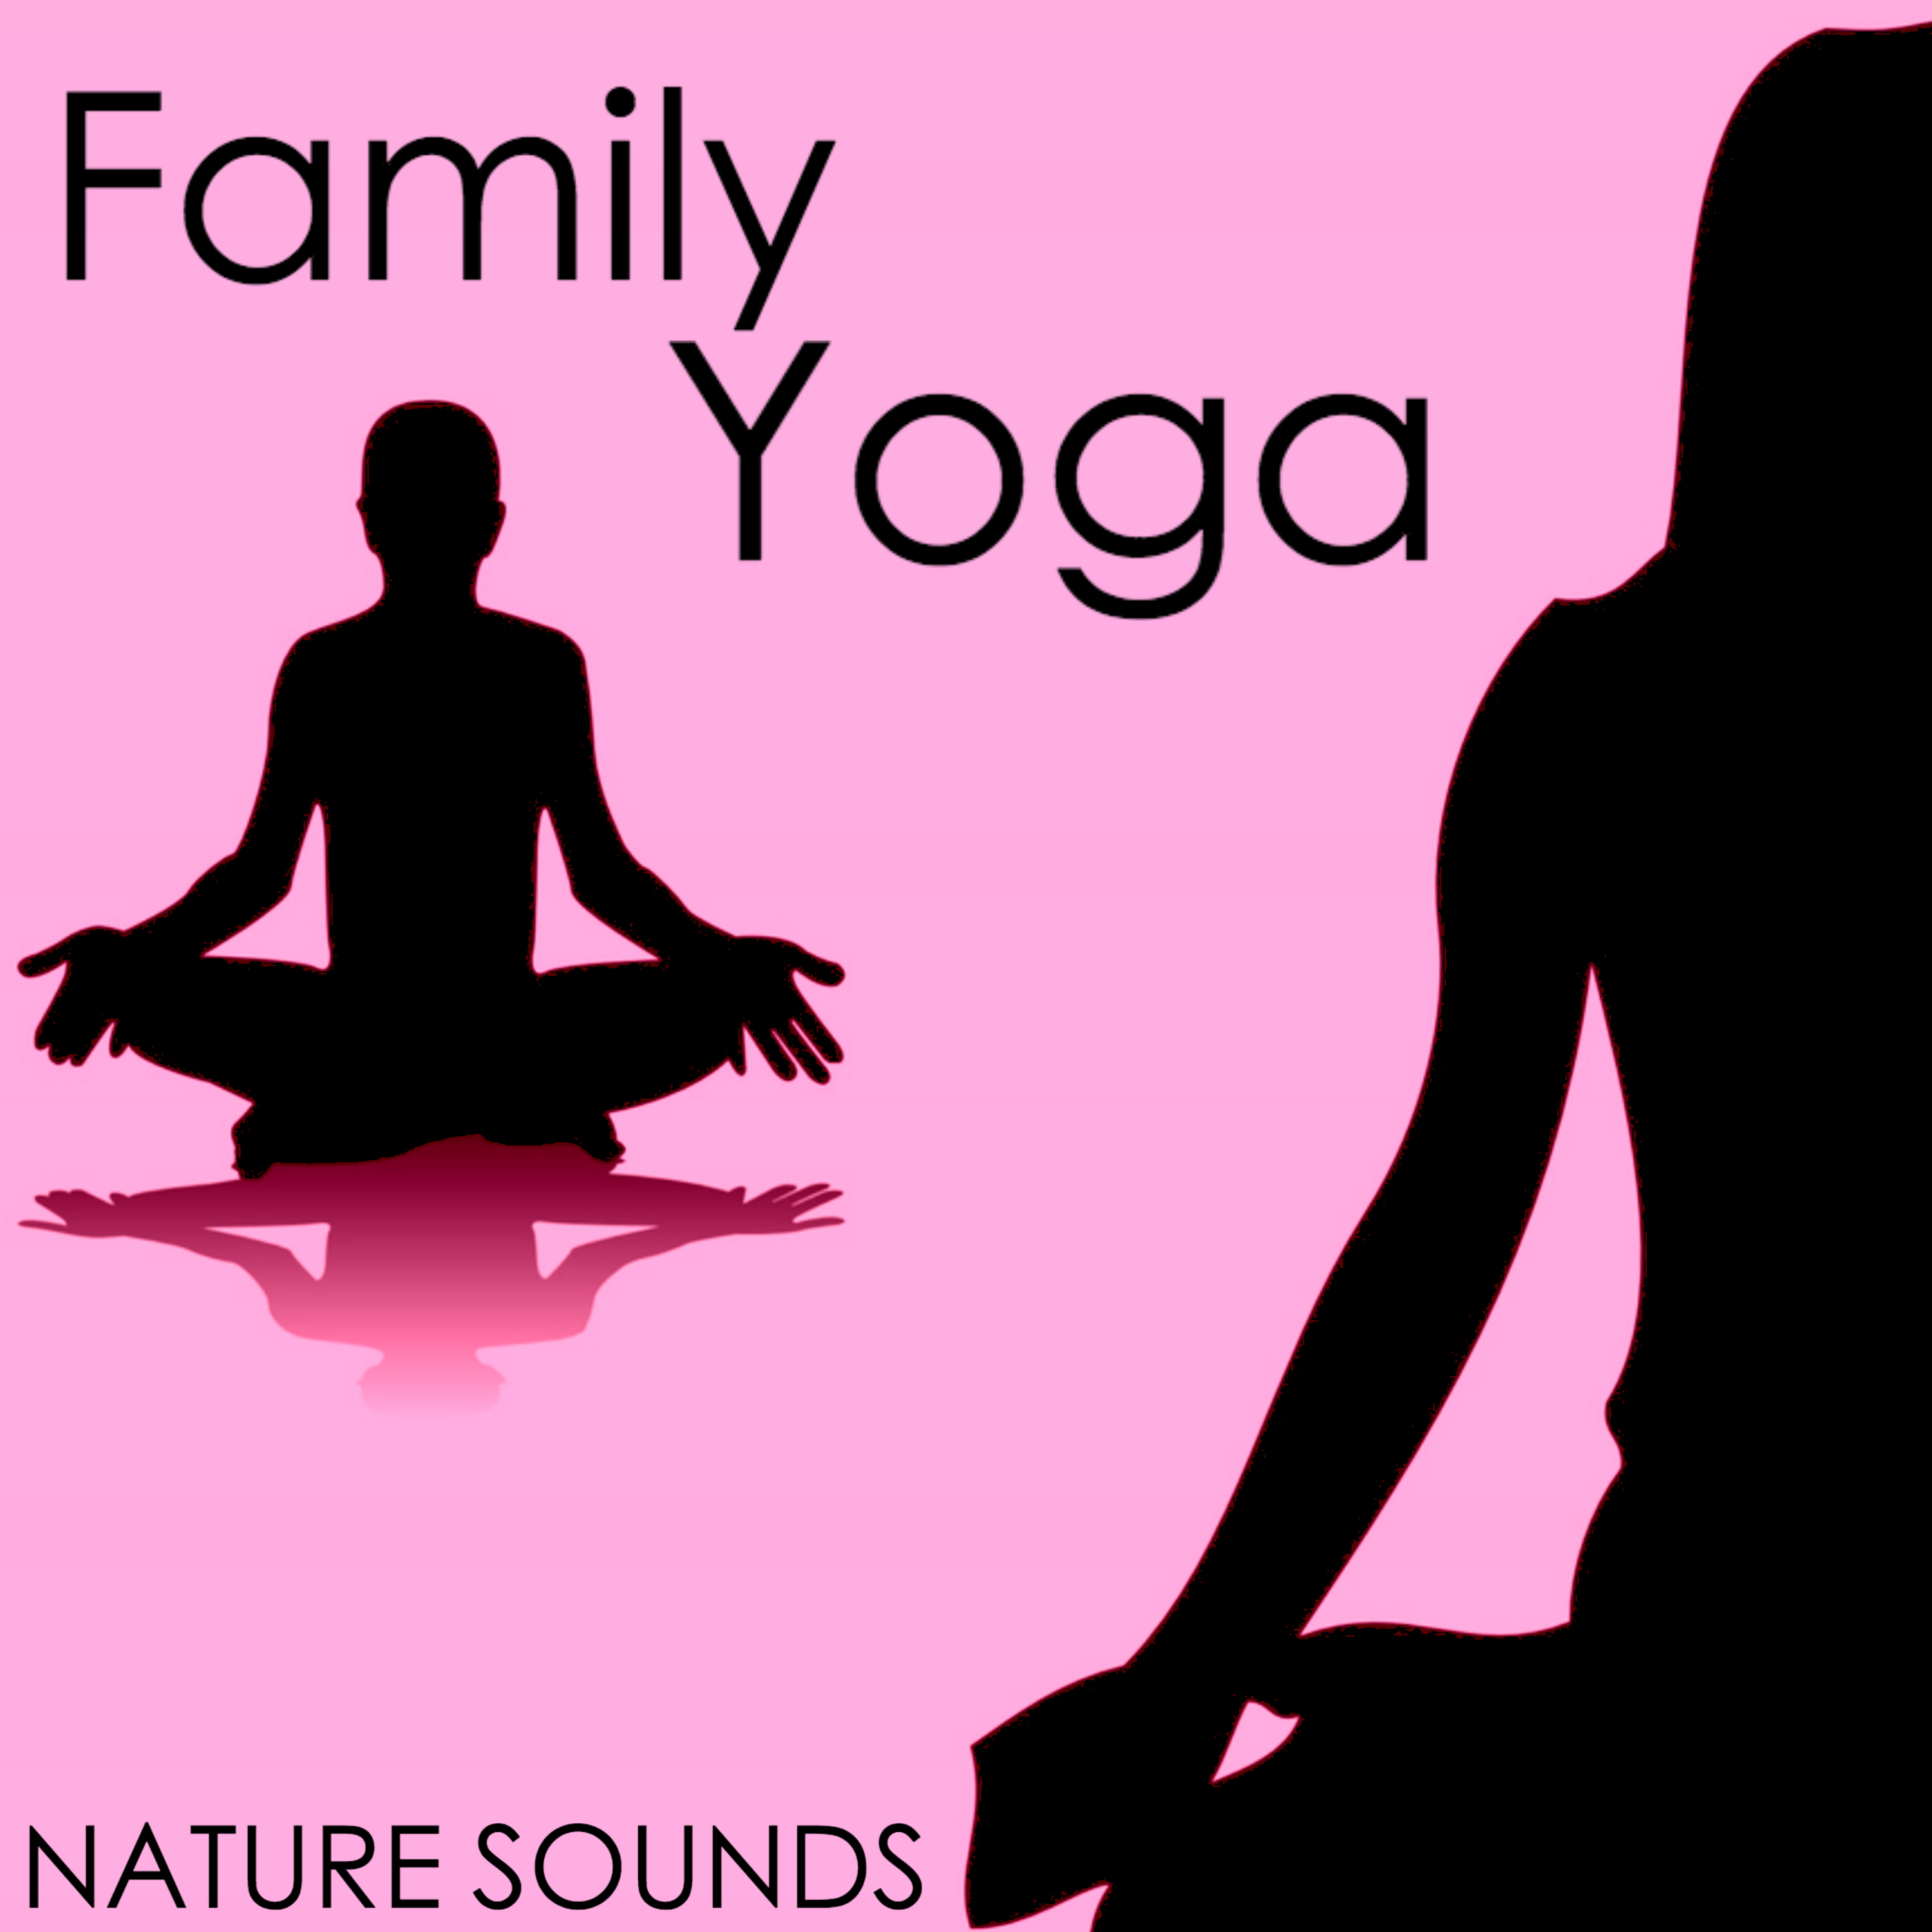 Family Yoga - Yogic Music for Mothers, Fathers and Children, Yoga Practice at Home